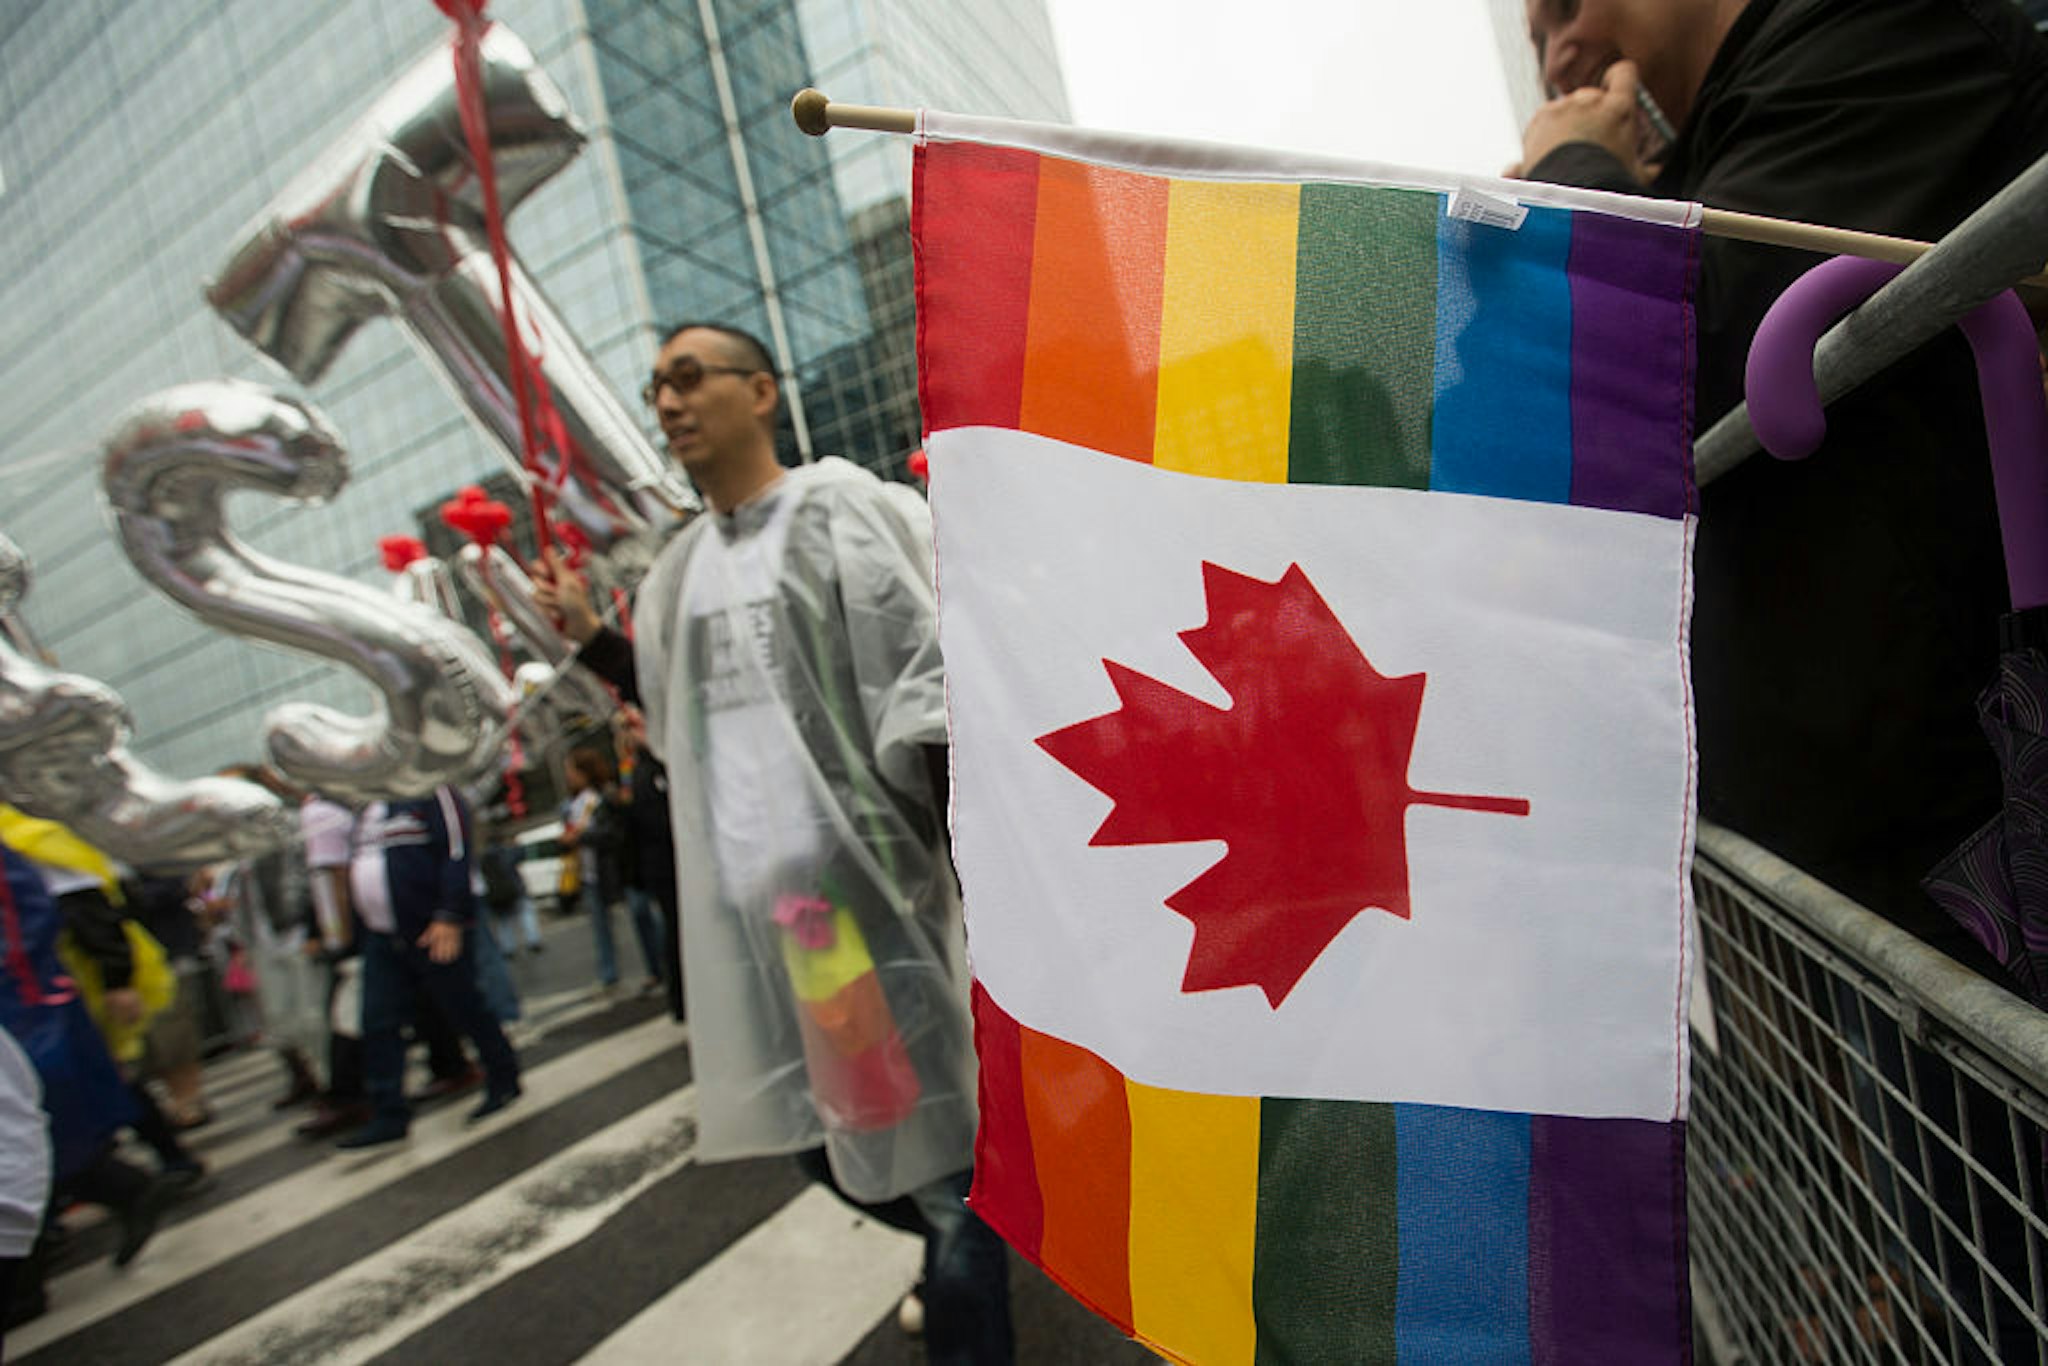 TORONTO, - JUNE 28, 2015 - A combination of a Canadian flag and a Pride flag hangs over the barrier on Bloor Street East. Toronto Pride 2015 took over the downtown core as the annual Pride Parade wound itself through the downtown. Photographed on JUNE 28, 2015. (Rick Madonik/Toronto Star via Getty Images)